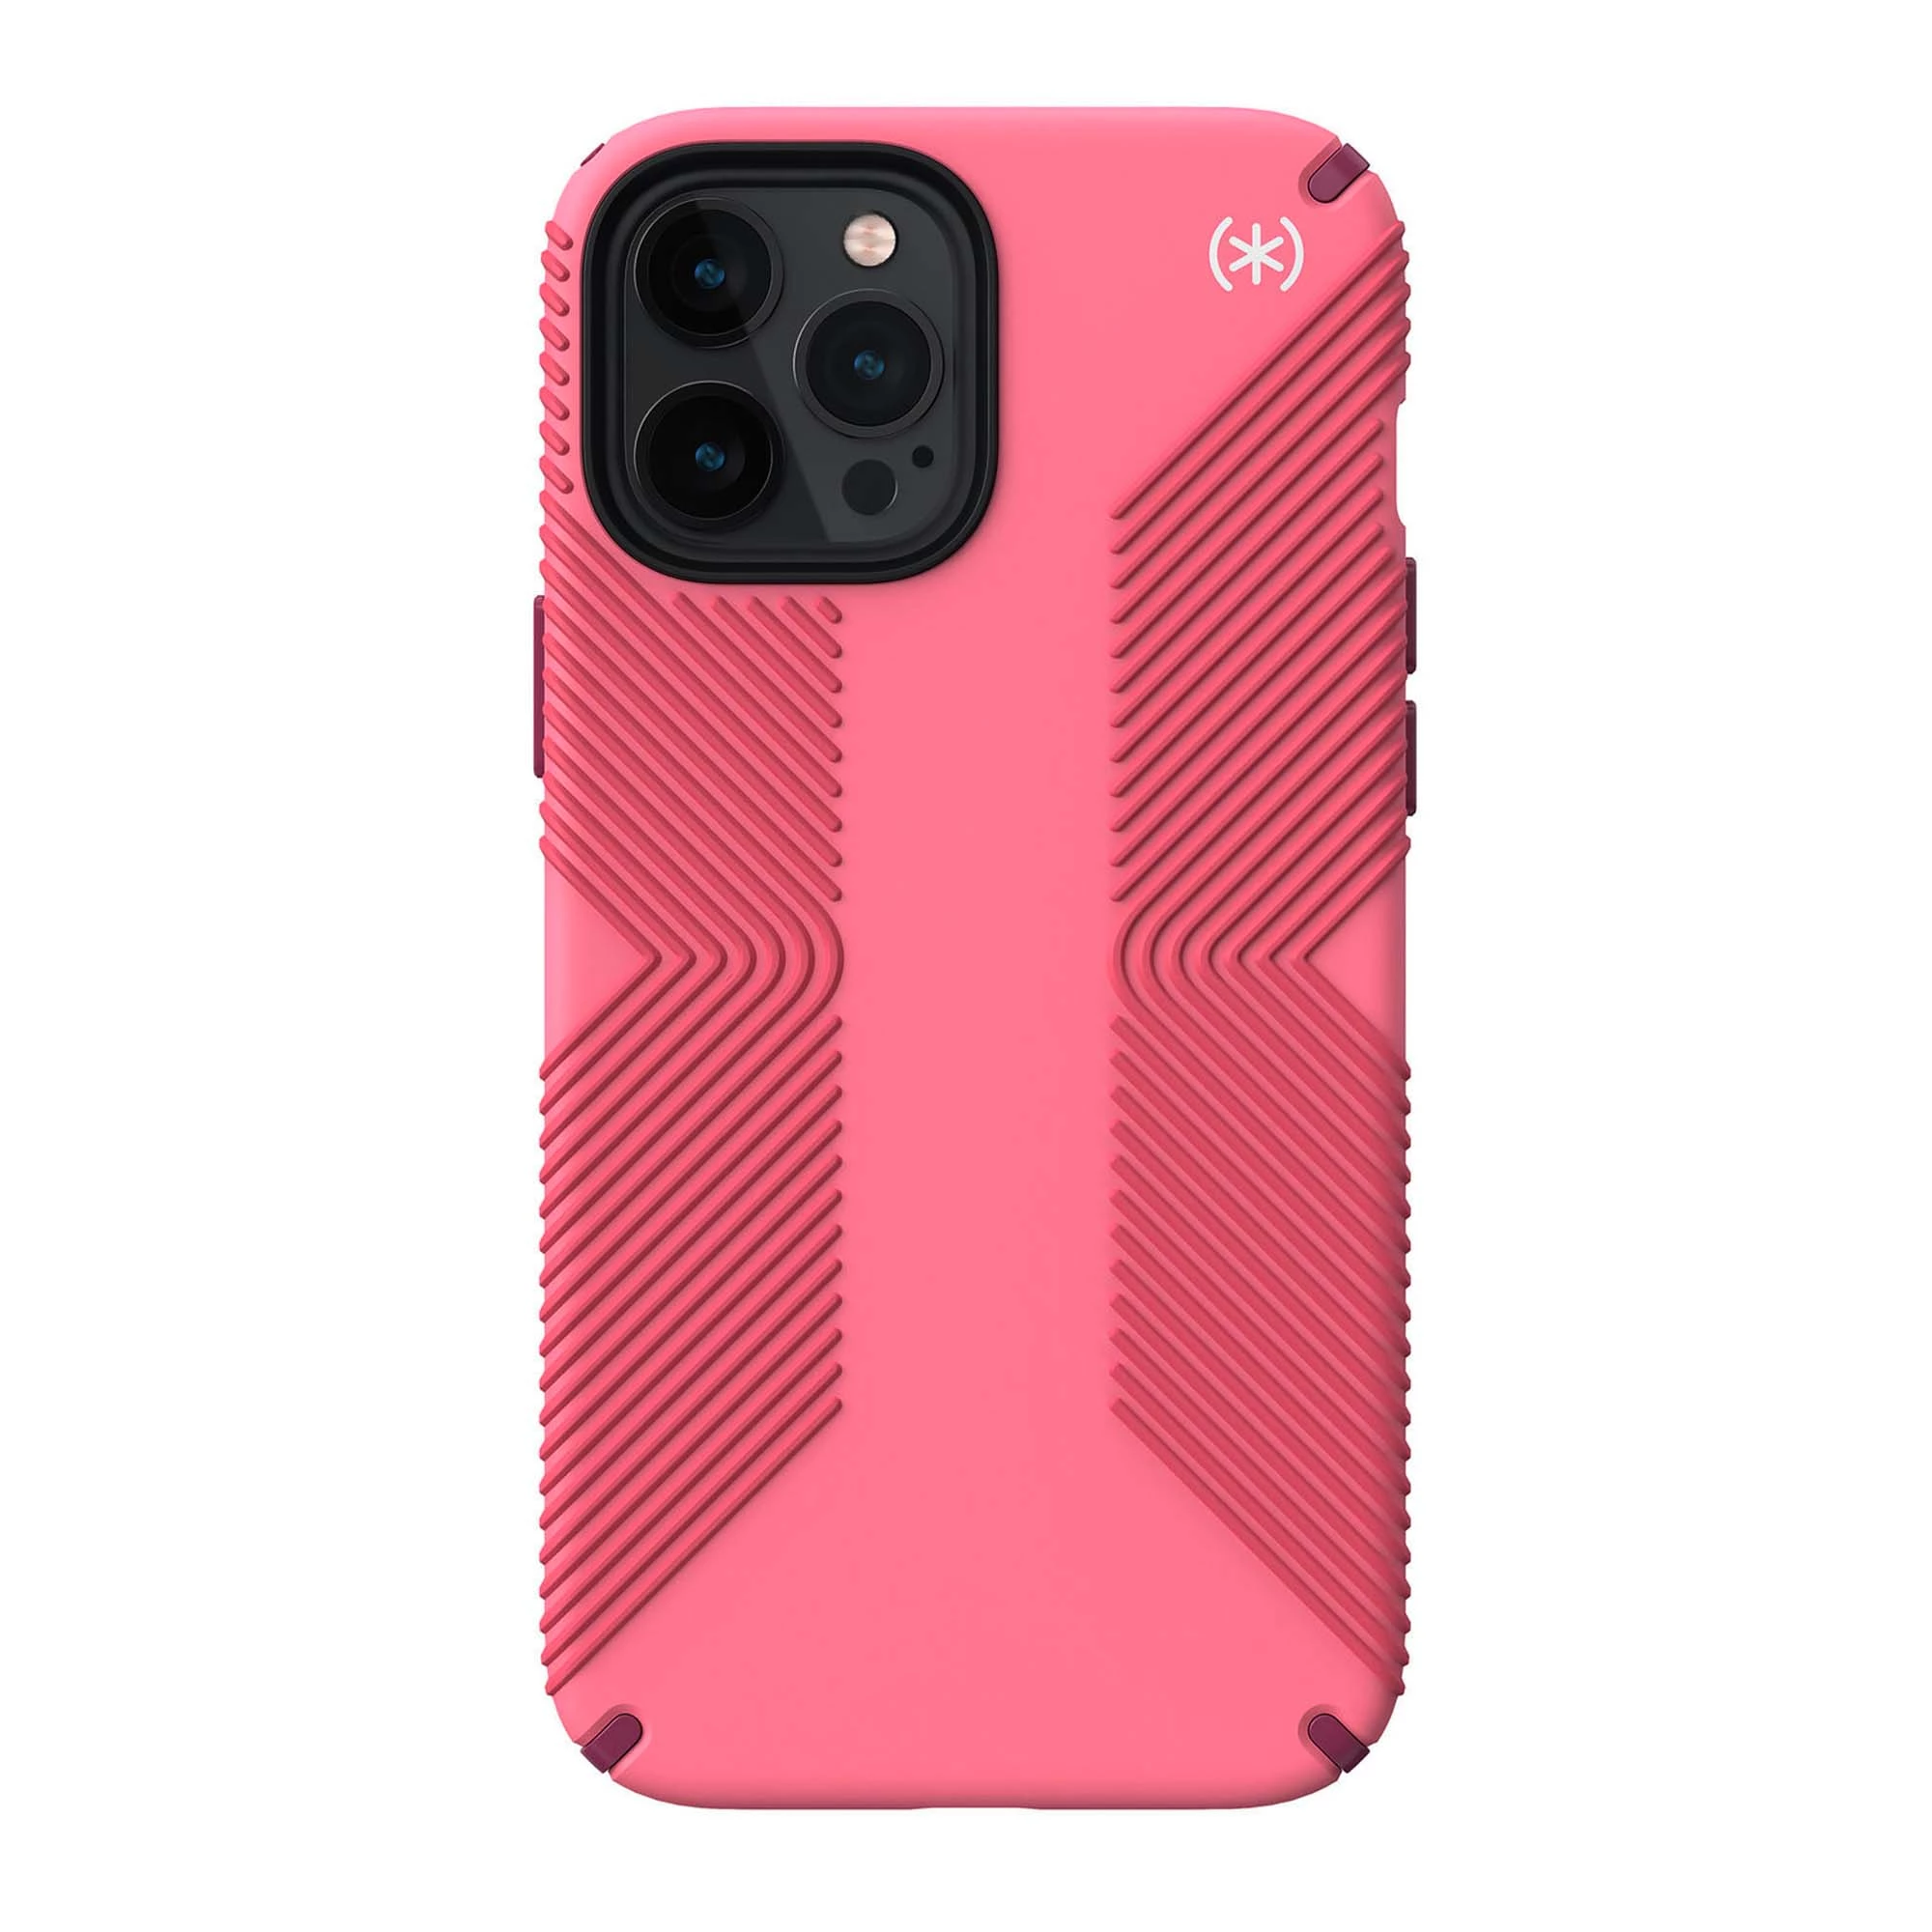 Speck Presidio2 Pro Case for iPhone 12 Pro Max - Royal Pink (138500-9286)